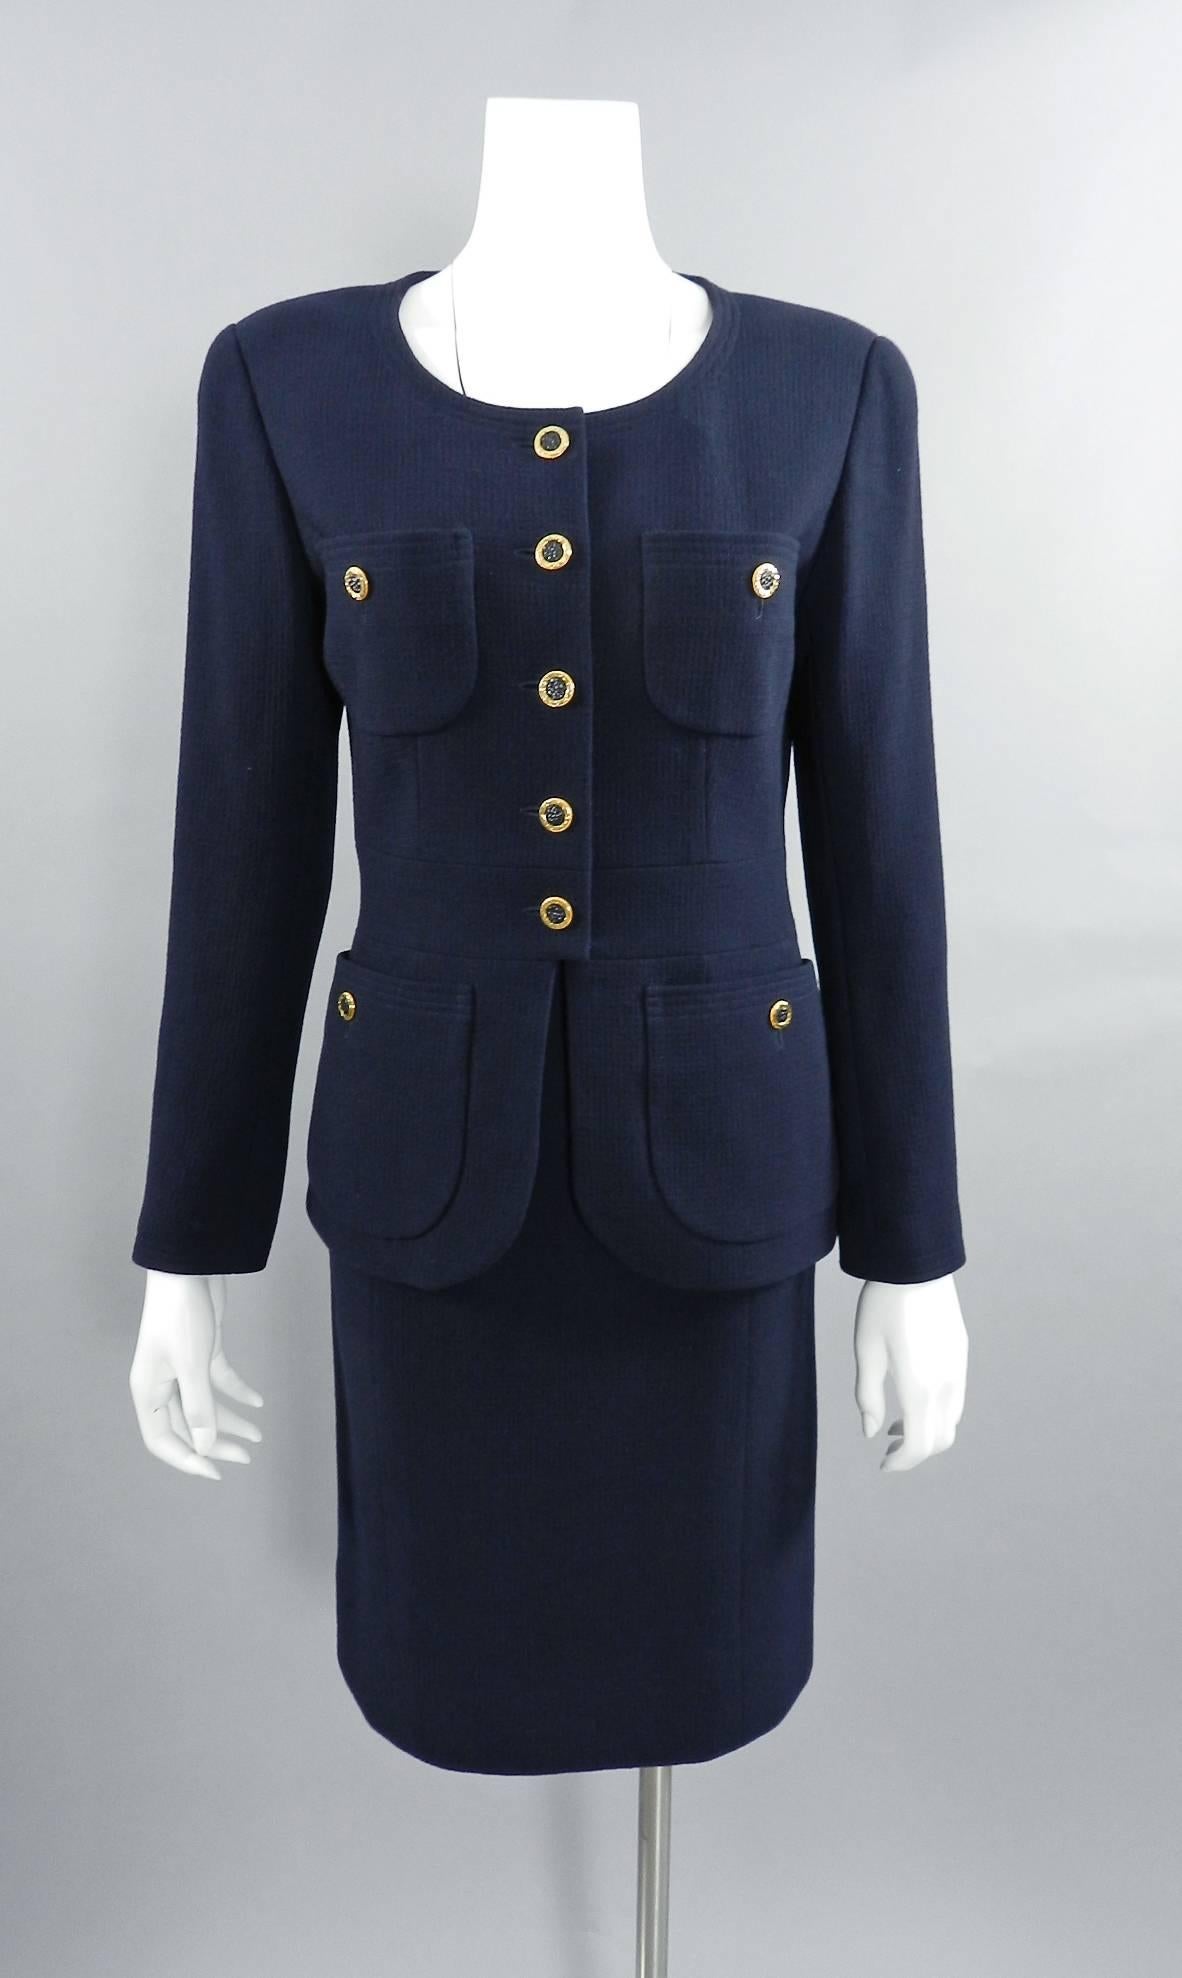 Chanel Vintage 1990's Navy Wool Skirt Suit with Gold Buttons 3